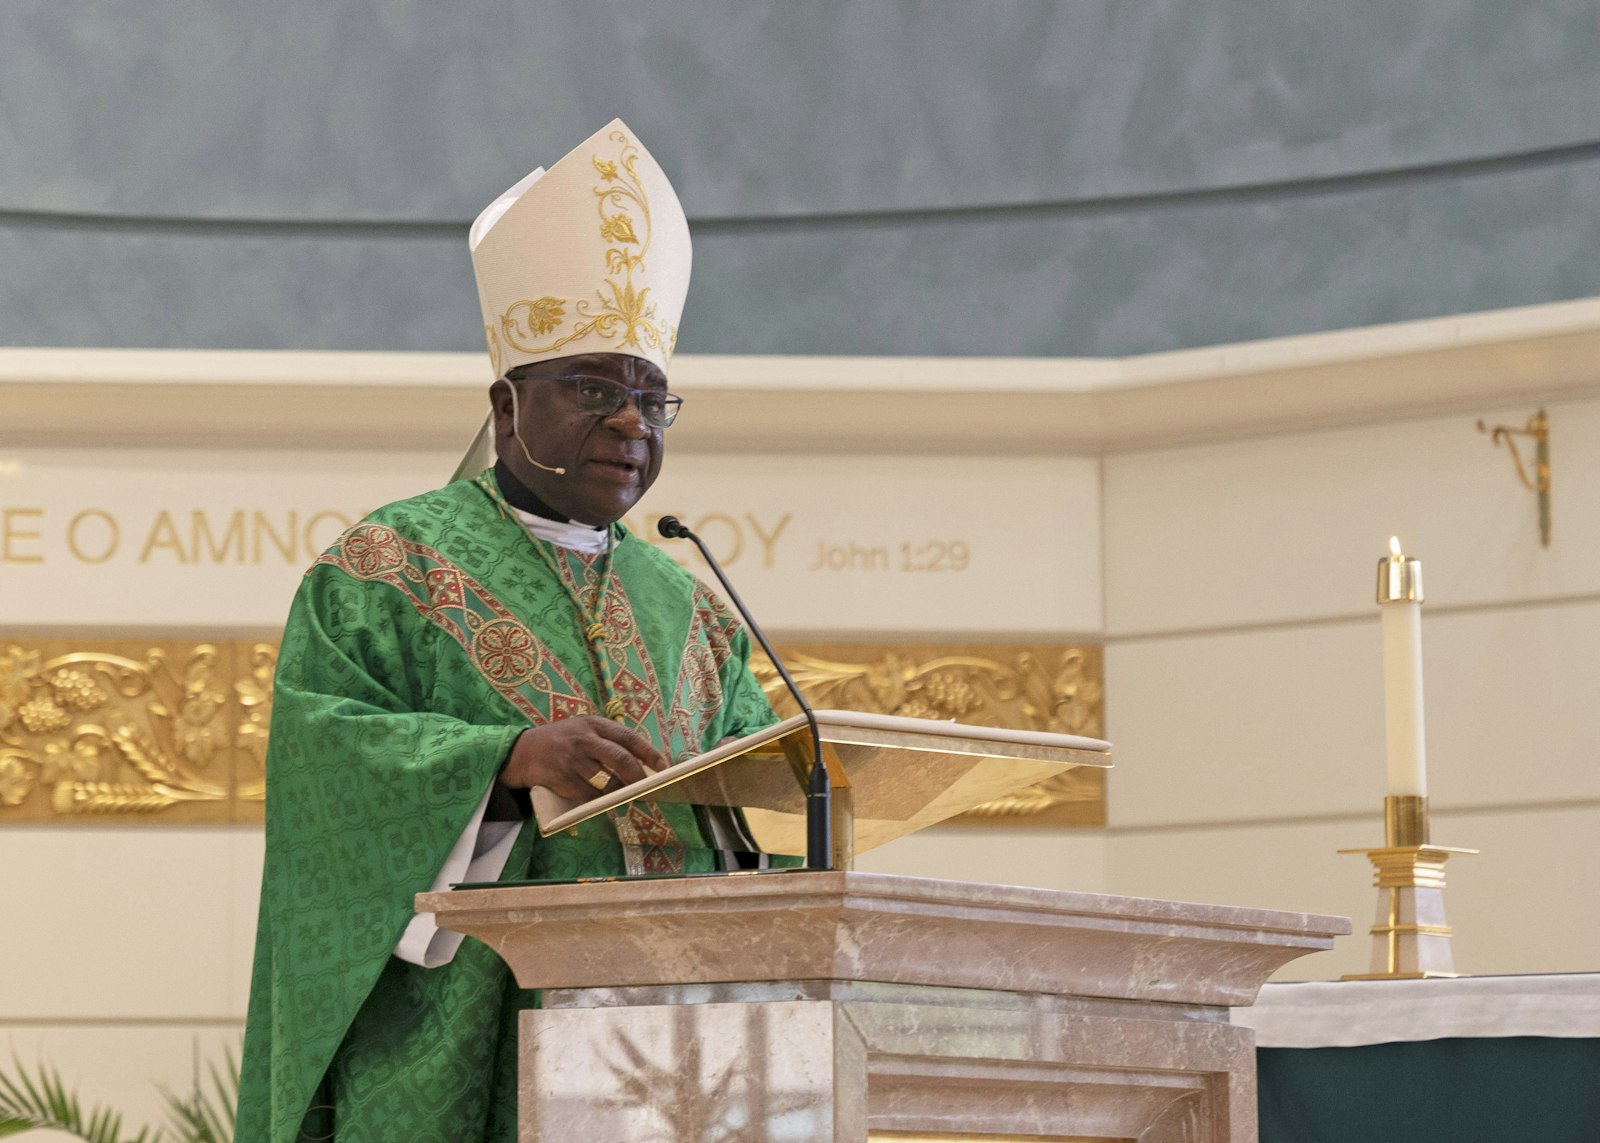 Archbishop Paul Ssemogerere of Kampala, Uganda, delivered the homily during the Uganda Martyr Mass at Our Lady of Good Counsel in Plymouth.